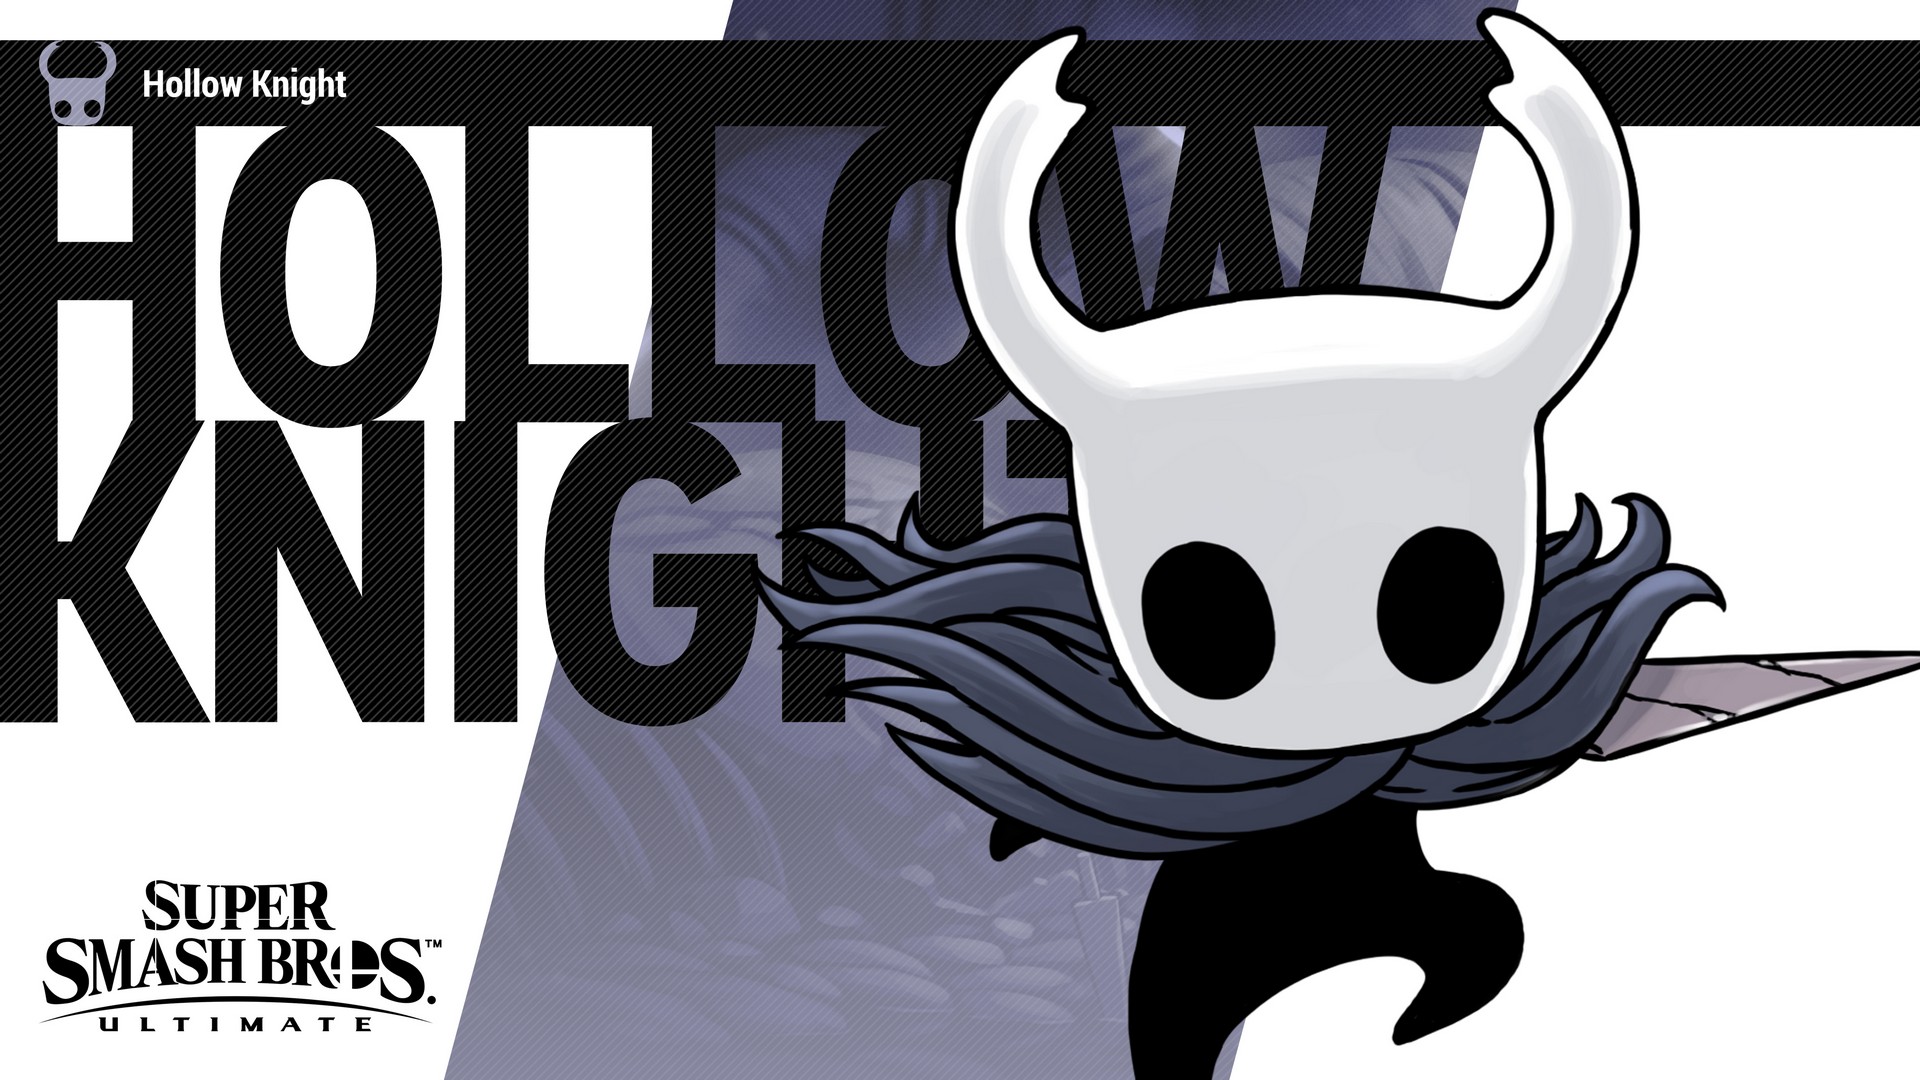 Hollow Knight Game HD Backgrounds with high-resolution 1920x1080 pixel. You can use this wallpaper for your Windows and Mac OS computers as well as your Android and iPhone smartphones